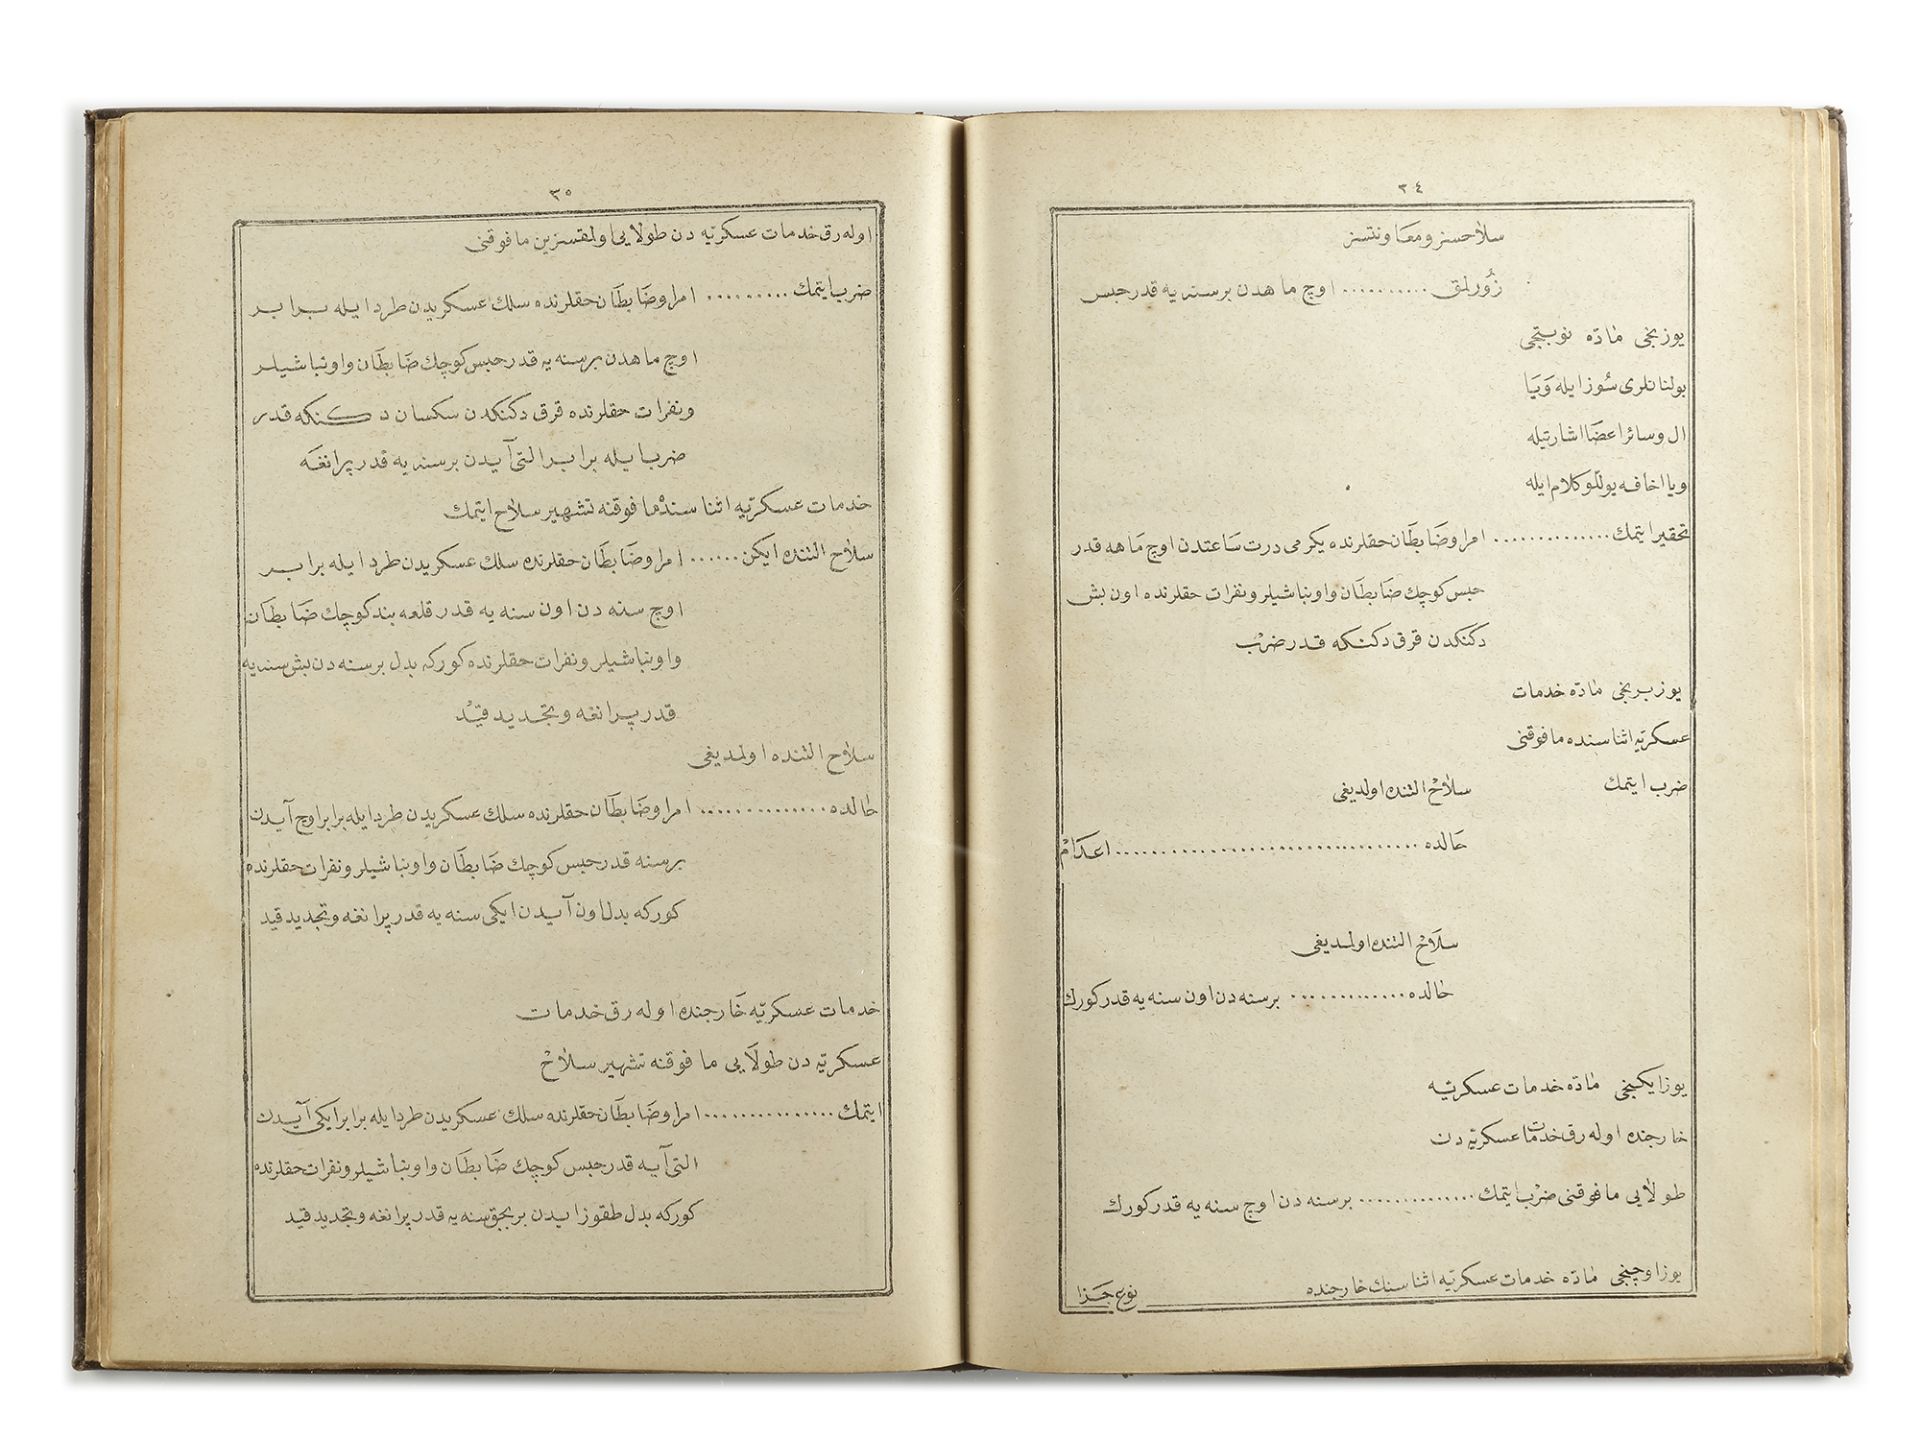 OTTOMAN MILITARY PENAL CODE, ISTANBUL DATED 1287 AH/ 1871 AD - Image 6 of 6